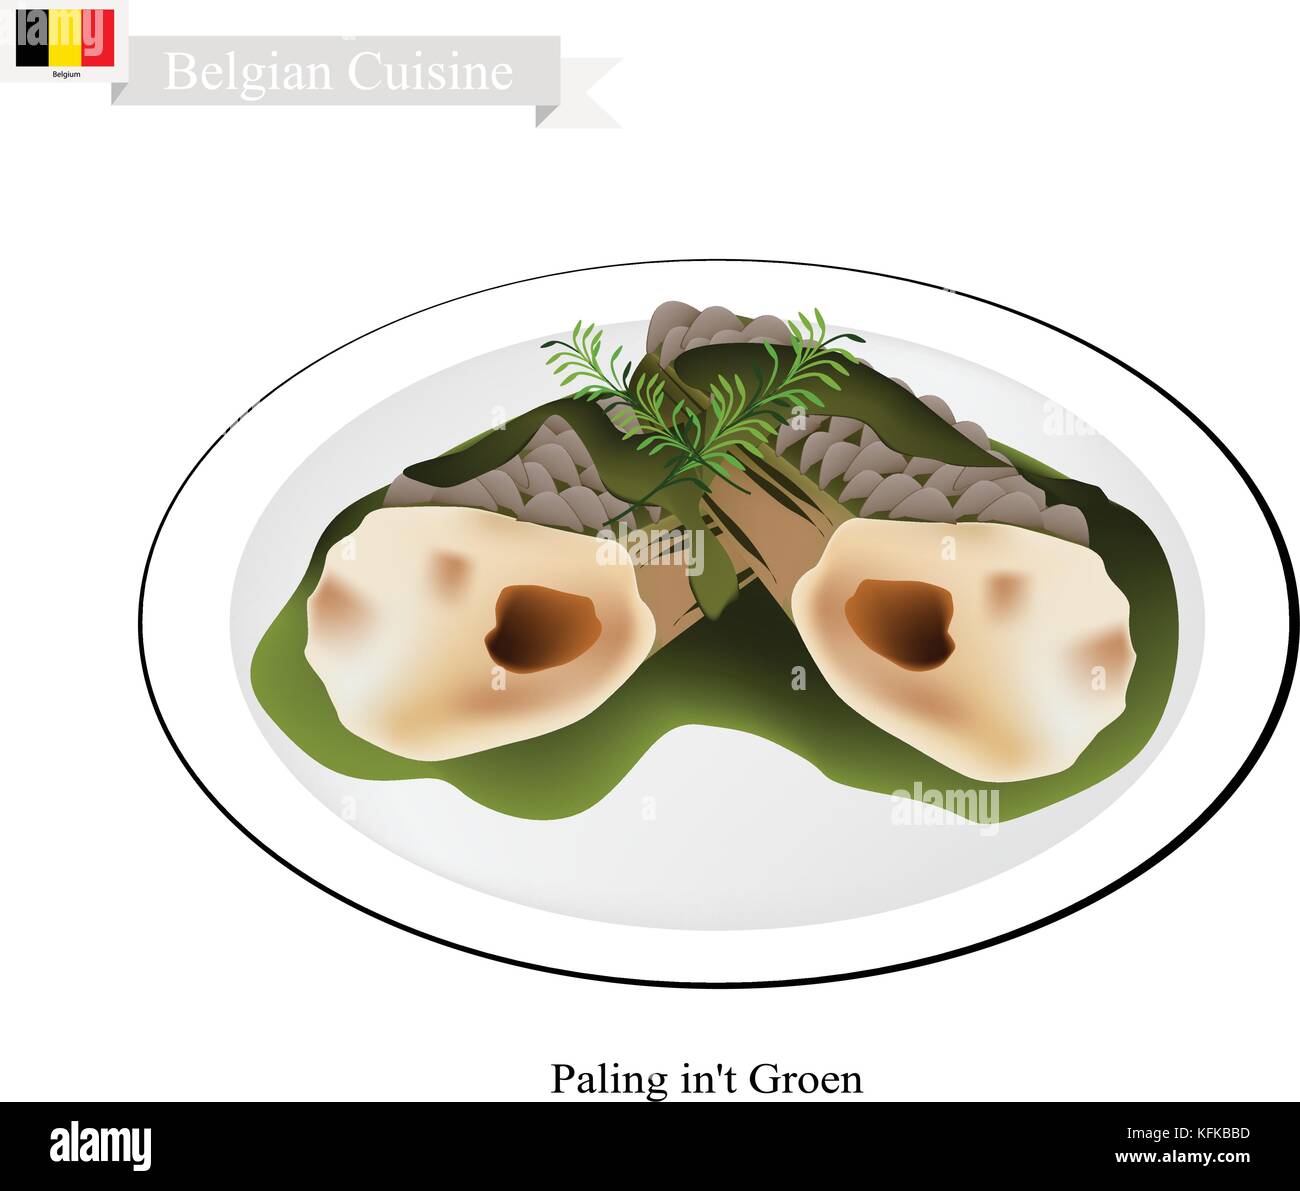 Belgian Cuisine, Illustration of Paling in't Groen or Traditional Steamed Eel in Green Spinach and Chervil Sauce. One of The Most Famous Dish in Belgi Stock Vector